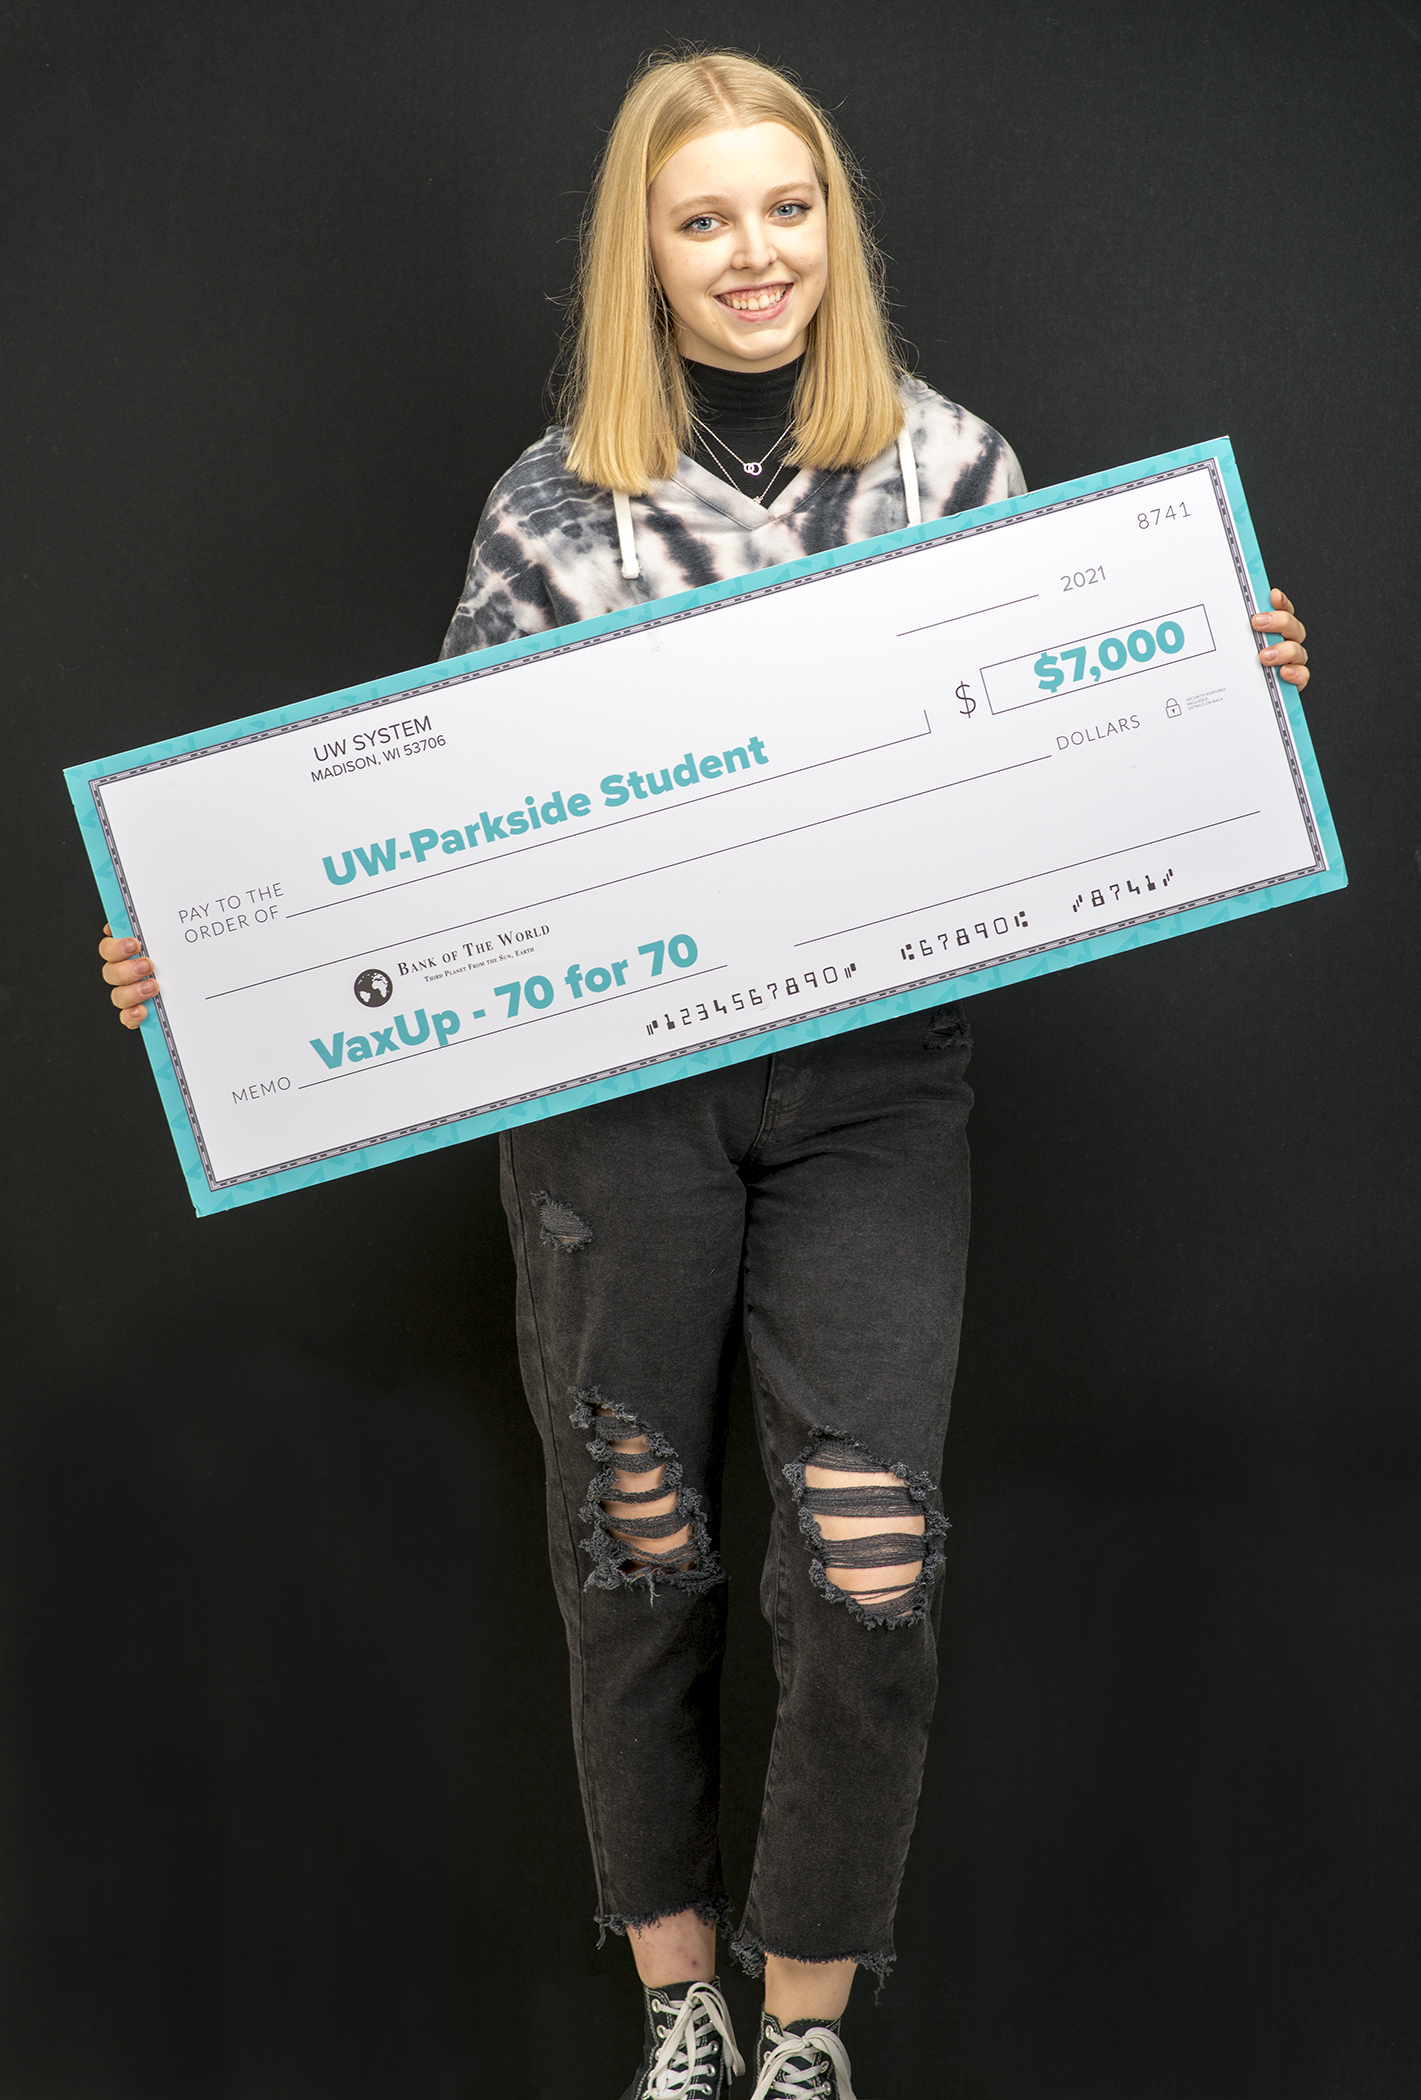  Jen Shaffer, UW-Parkside student and one of the three winners of a $7,000 Vax Up! Scholarship 